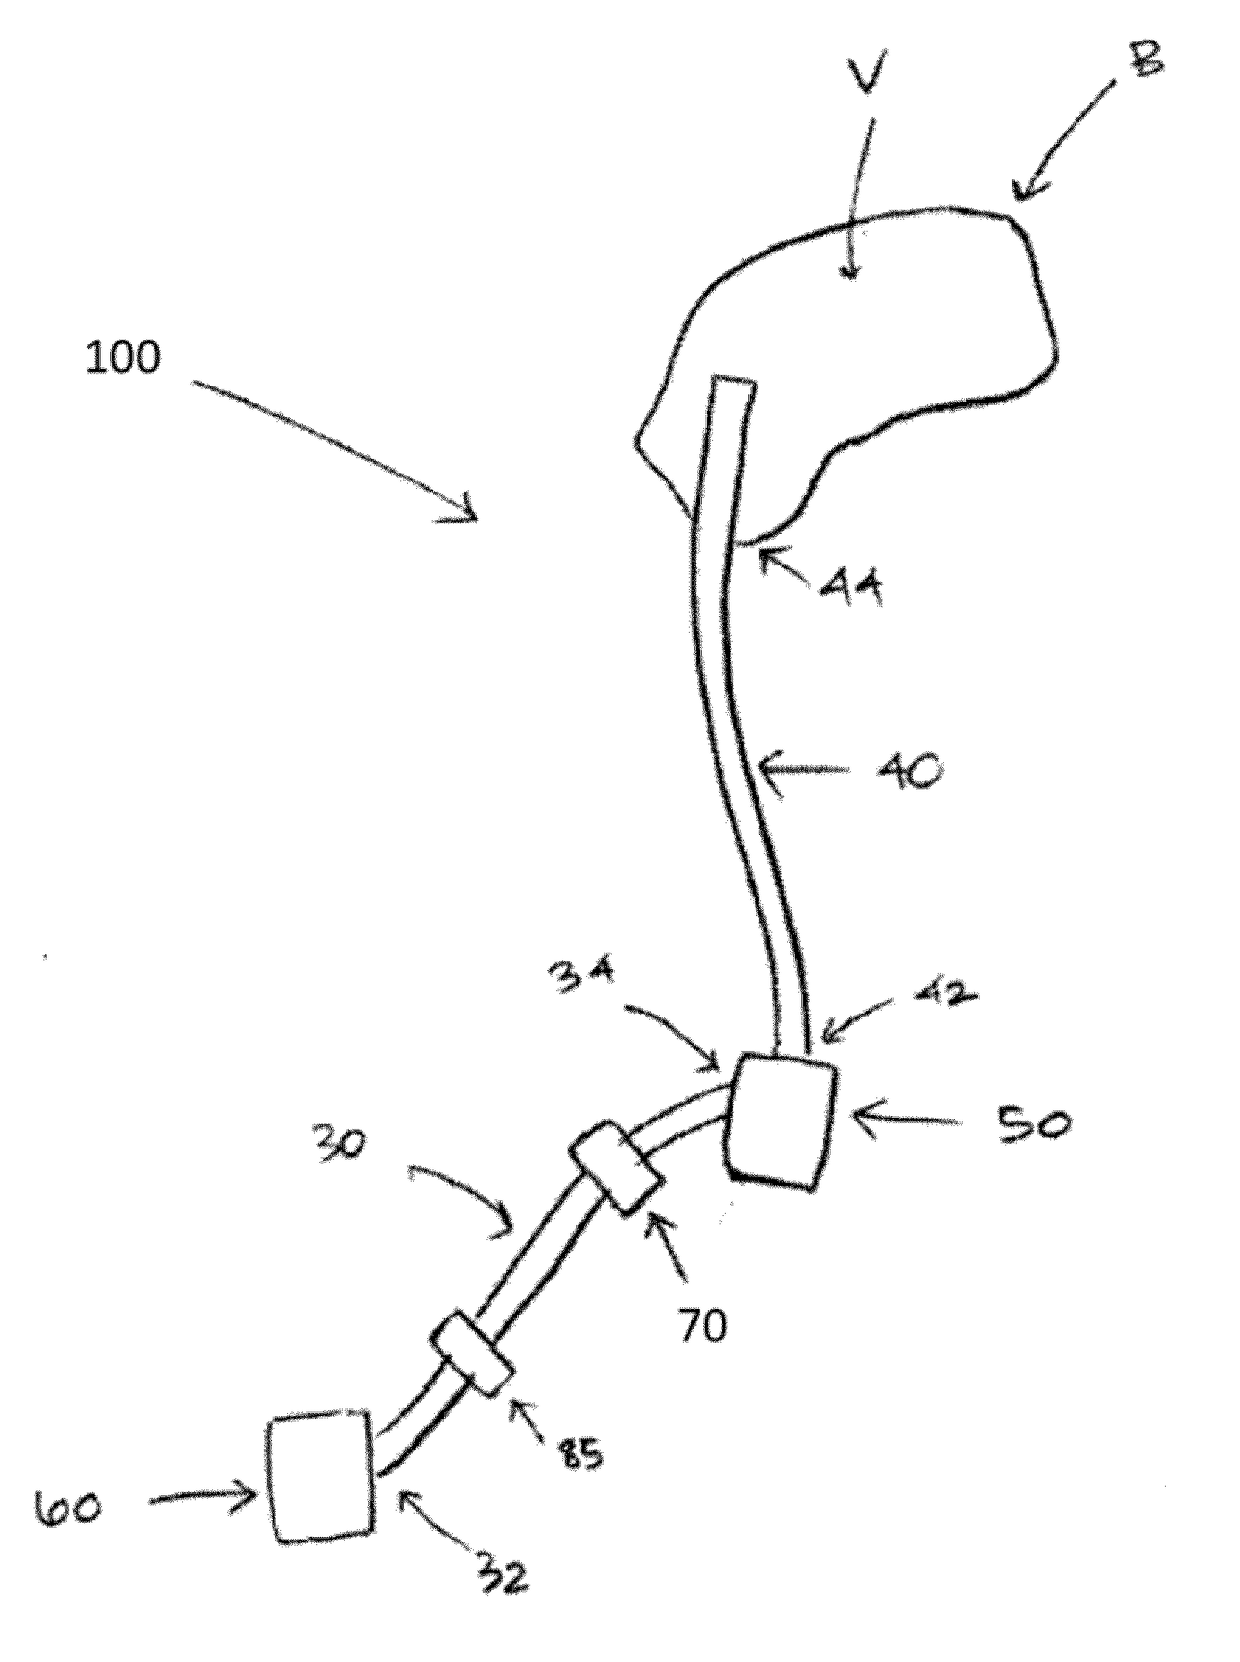 Therapeutic applications of artificial cerebrospinal fluid and tools provided therefor